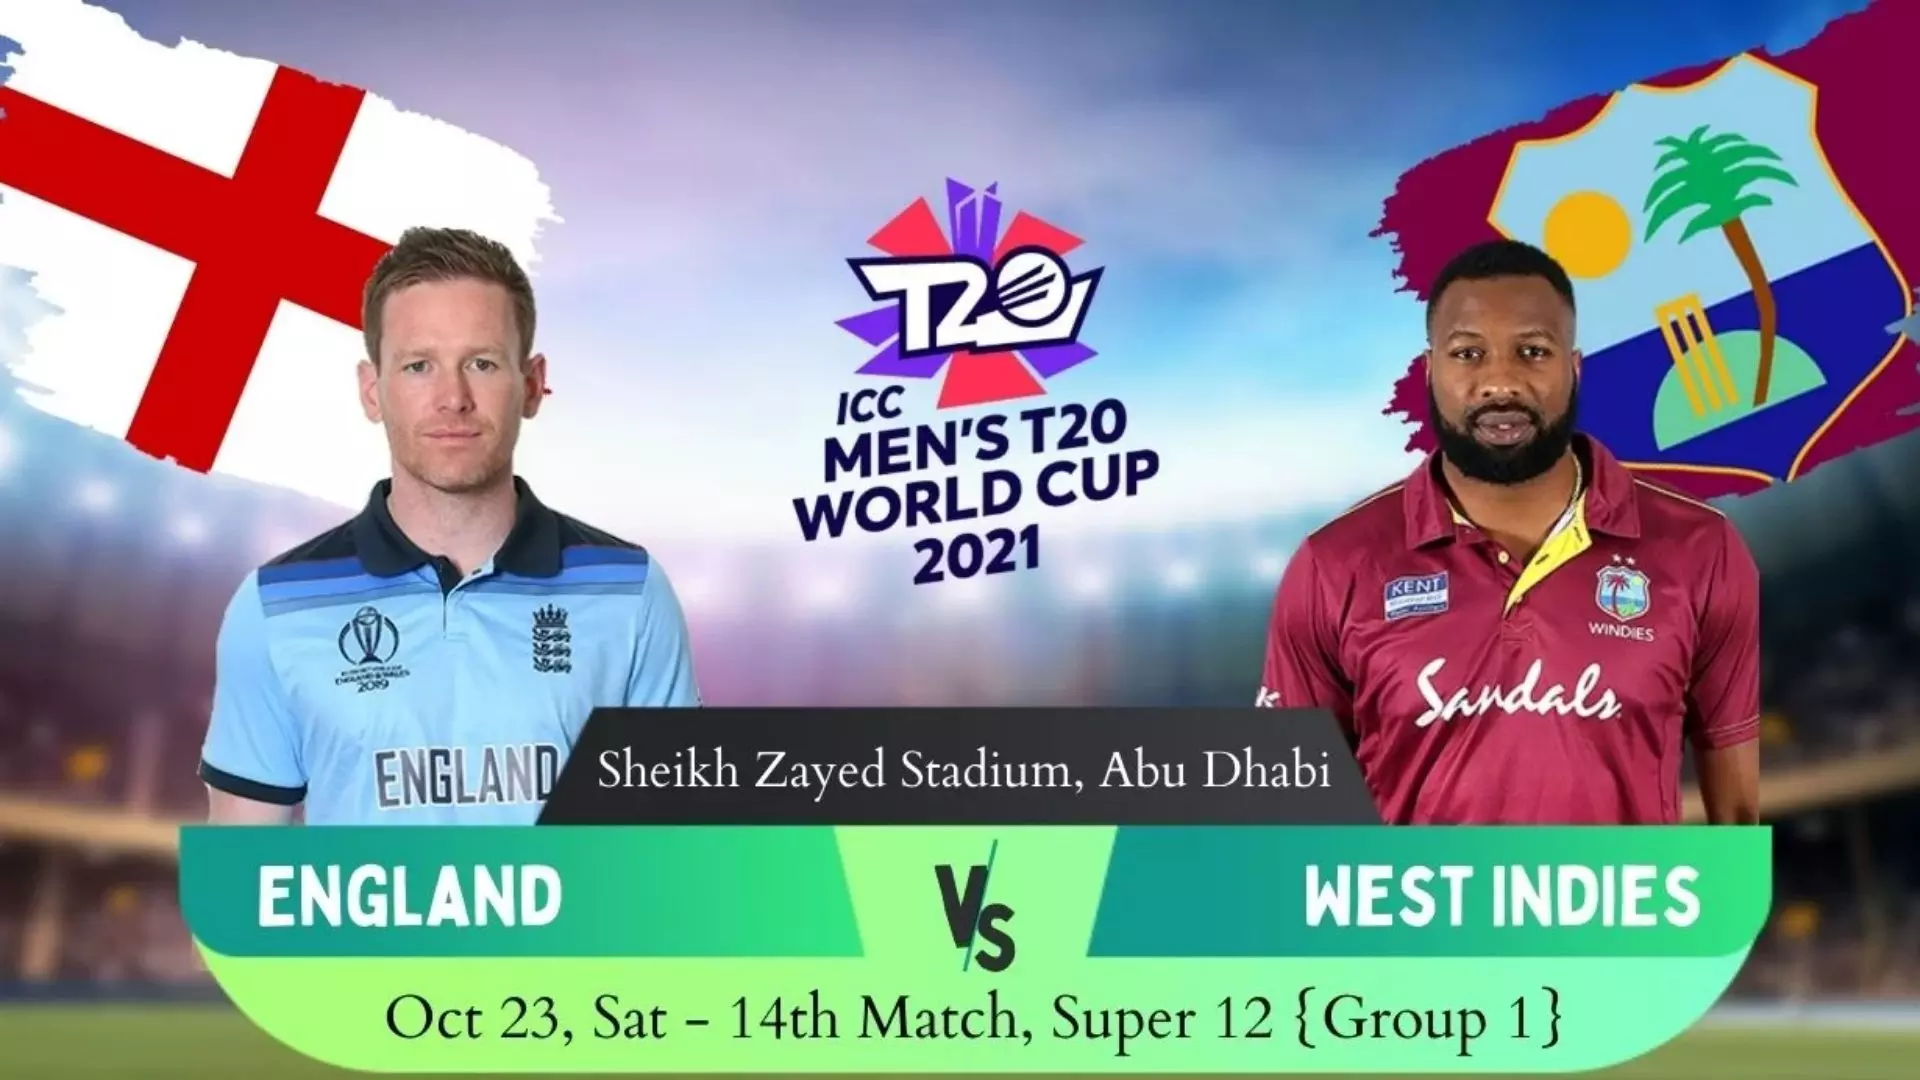 T20 World Cup 2021 Starts West Indies vs England T20 Match Today 23 10 2021